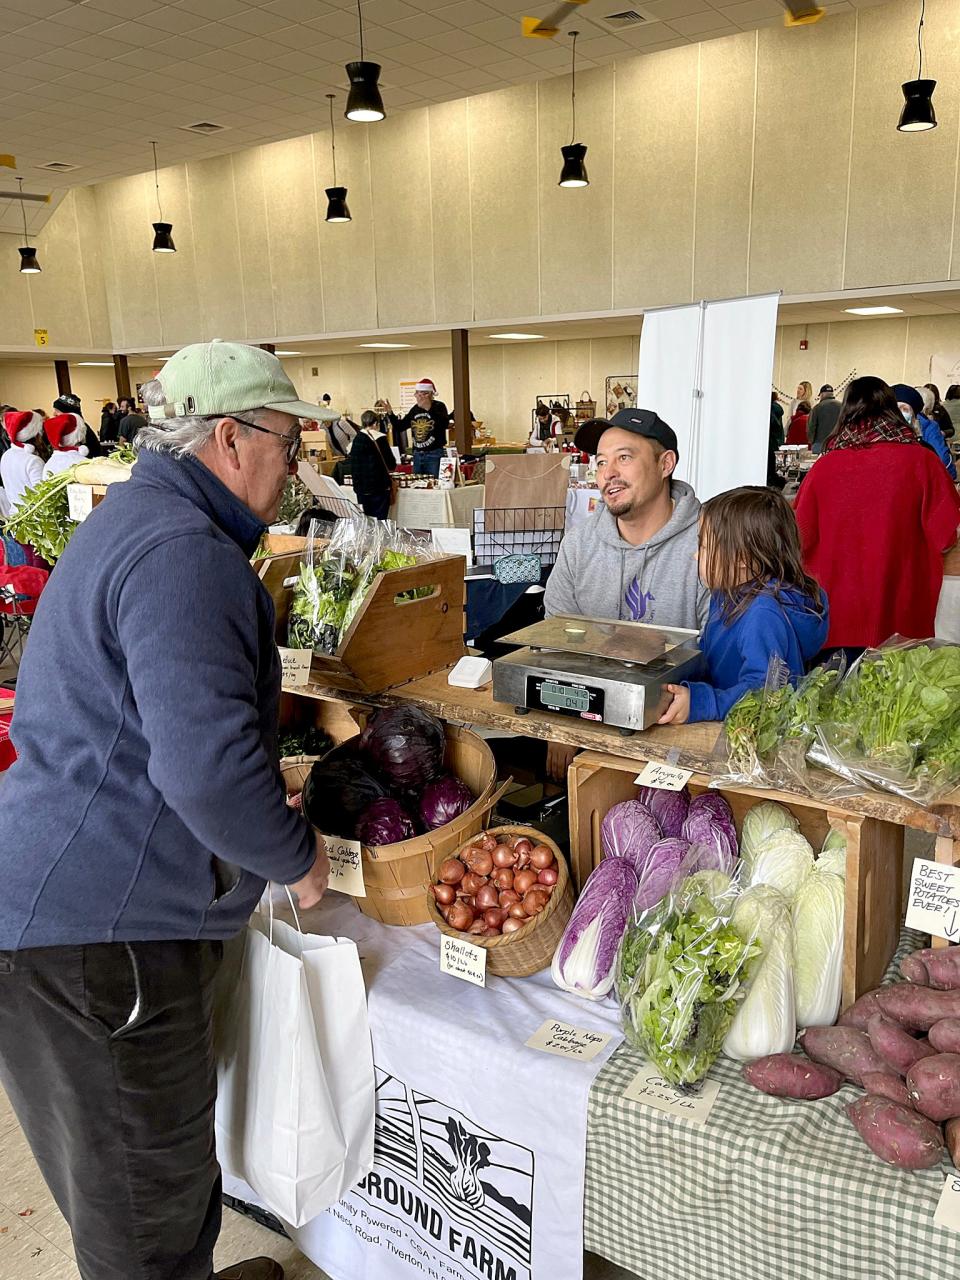 Movement Ground Farm is among the vendors participating in the Tiverton Valentine’s Farmers Market.